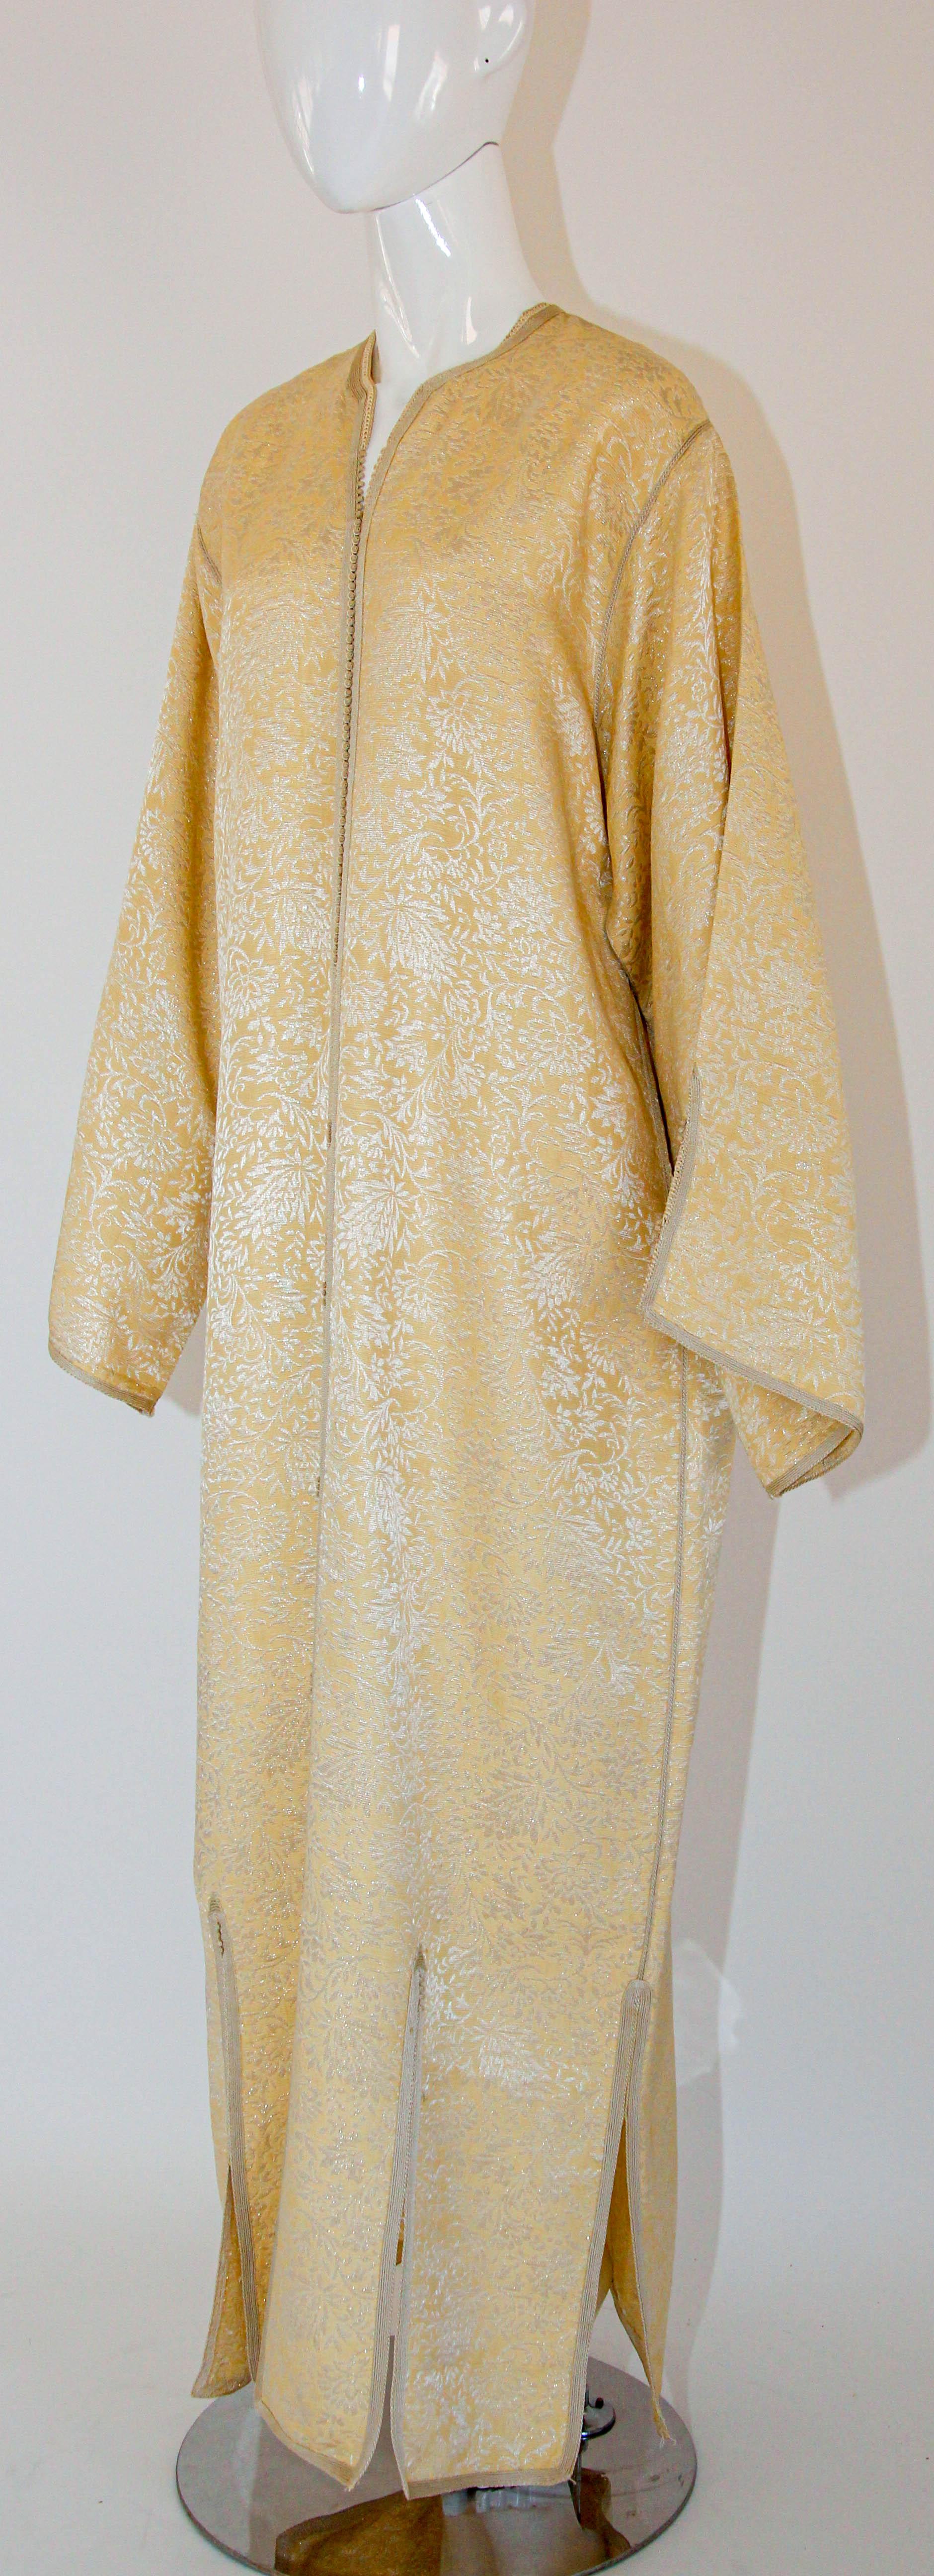 1970s Moroccan vintage caftan is a timeless and captivating piece of clothing that embodies the essence of Moroccan culture and style from that era. 
This stunning caftan showcases the exquisite craftsmanship and vibrant aesthetic that defined